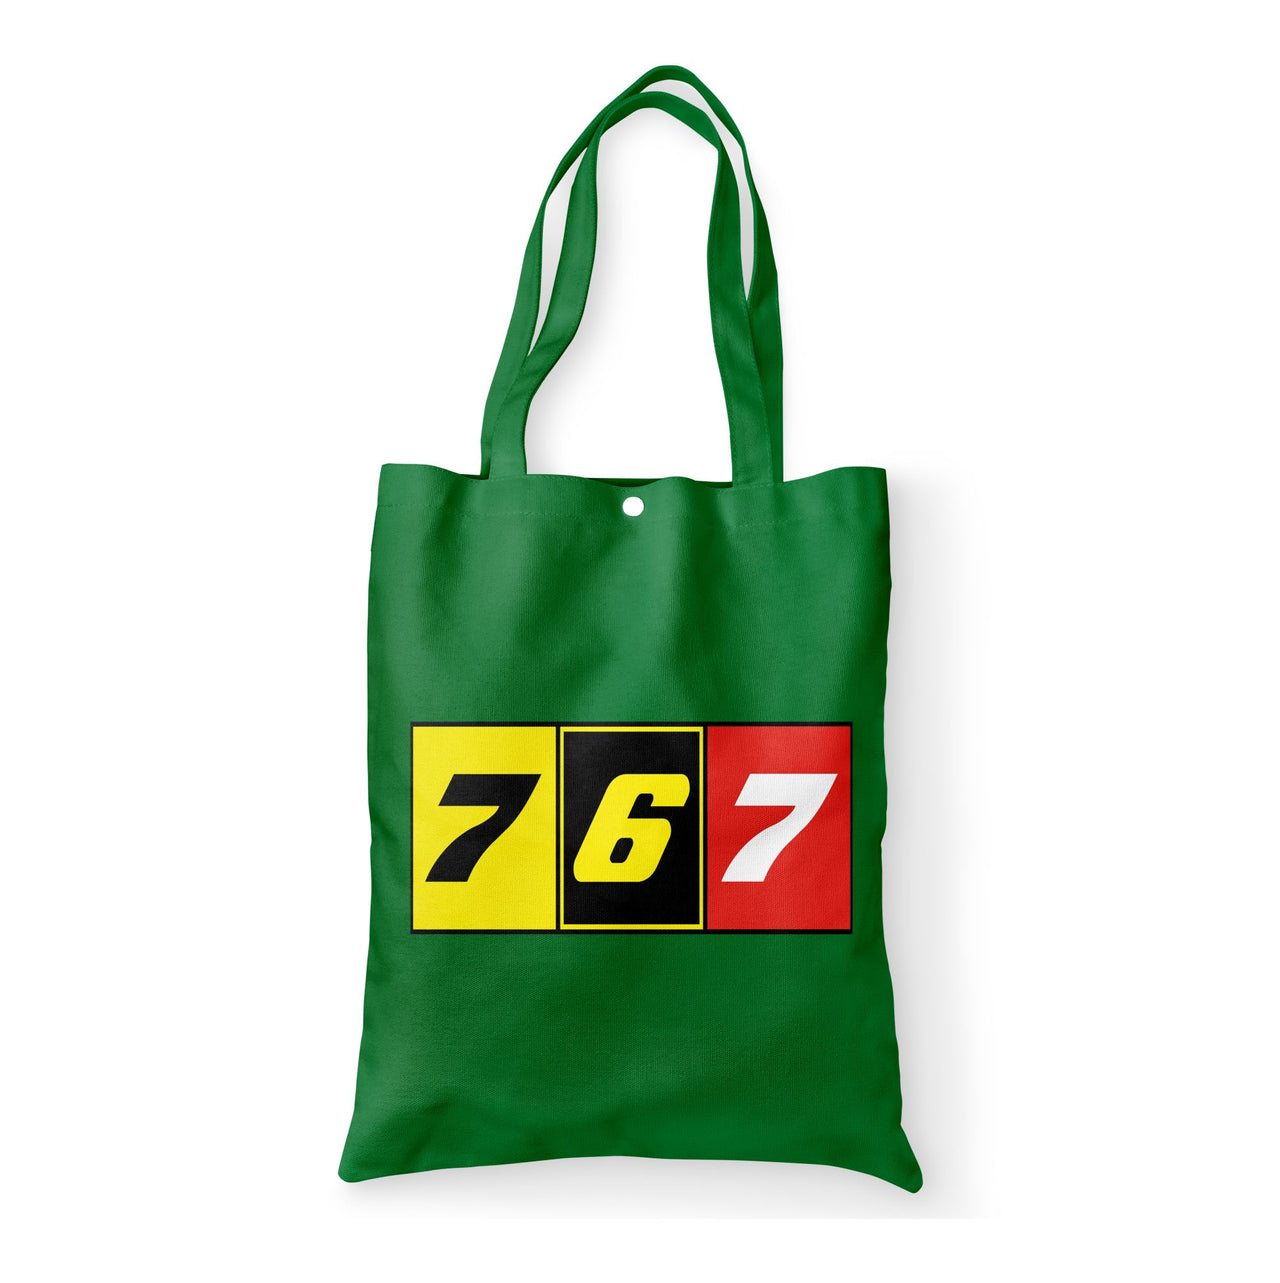 Flat Colourful 767 Designed Tote Bags